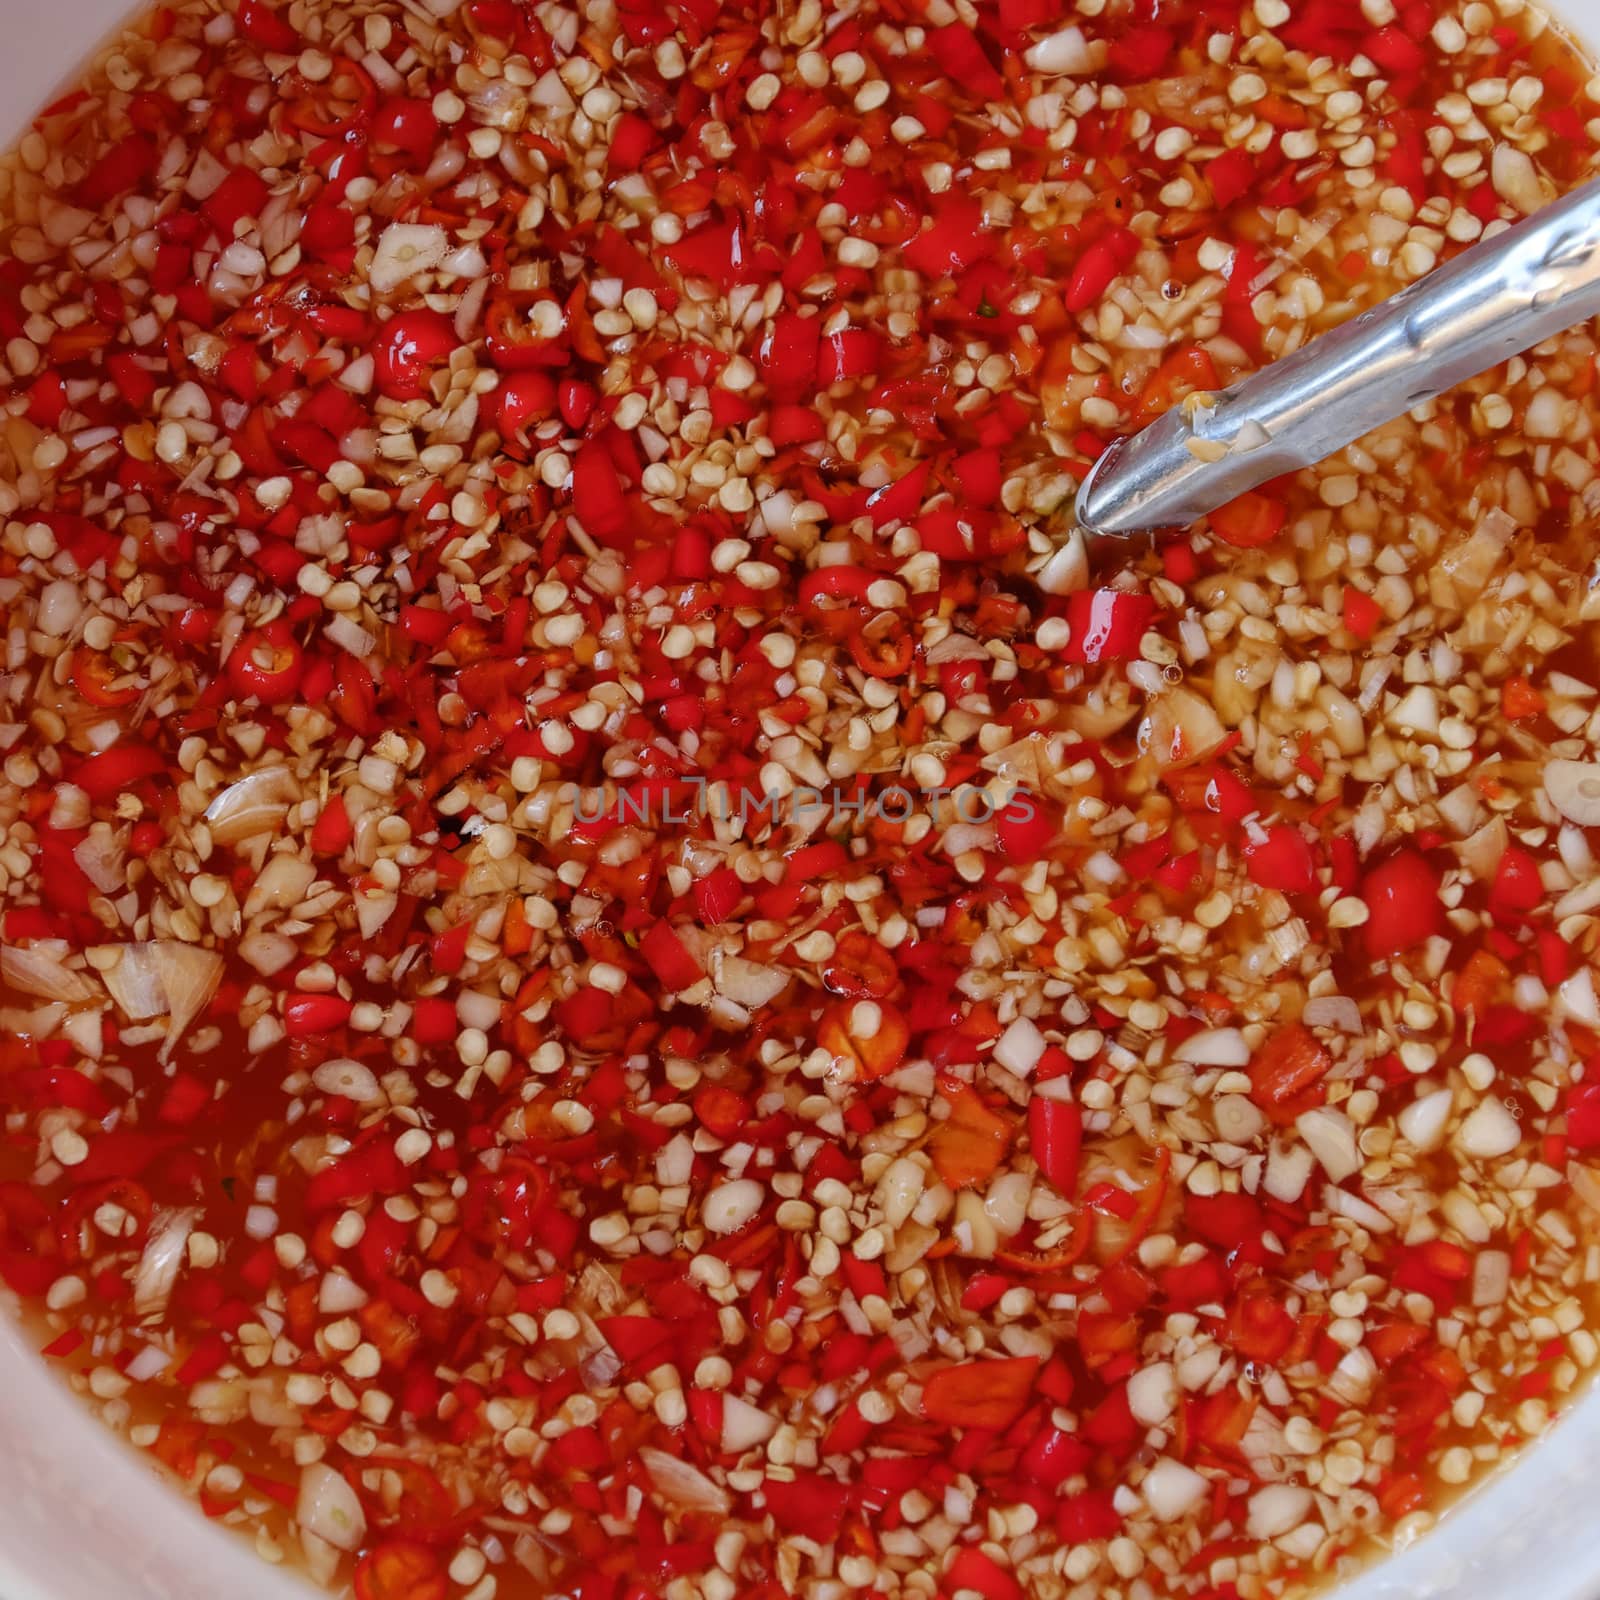 Vietnamese sauce for food, fish sauce with red hot chilli and choped garlic, amazing bowl of red